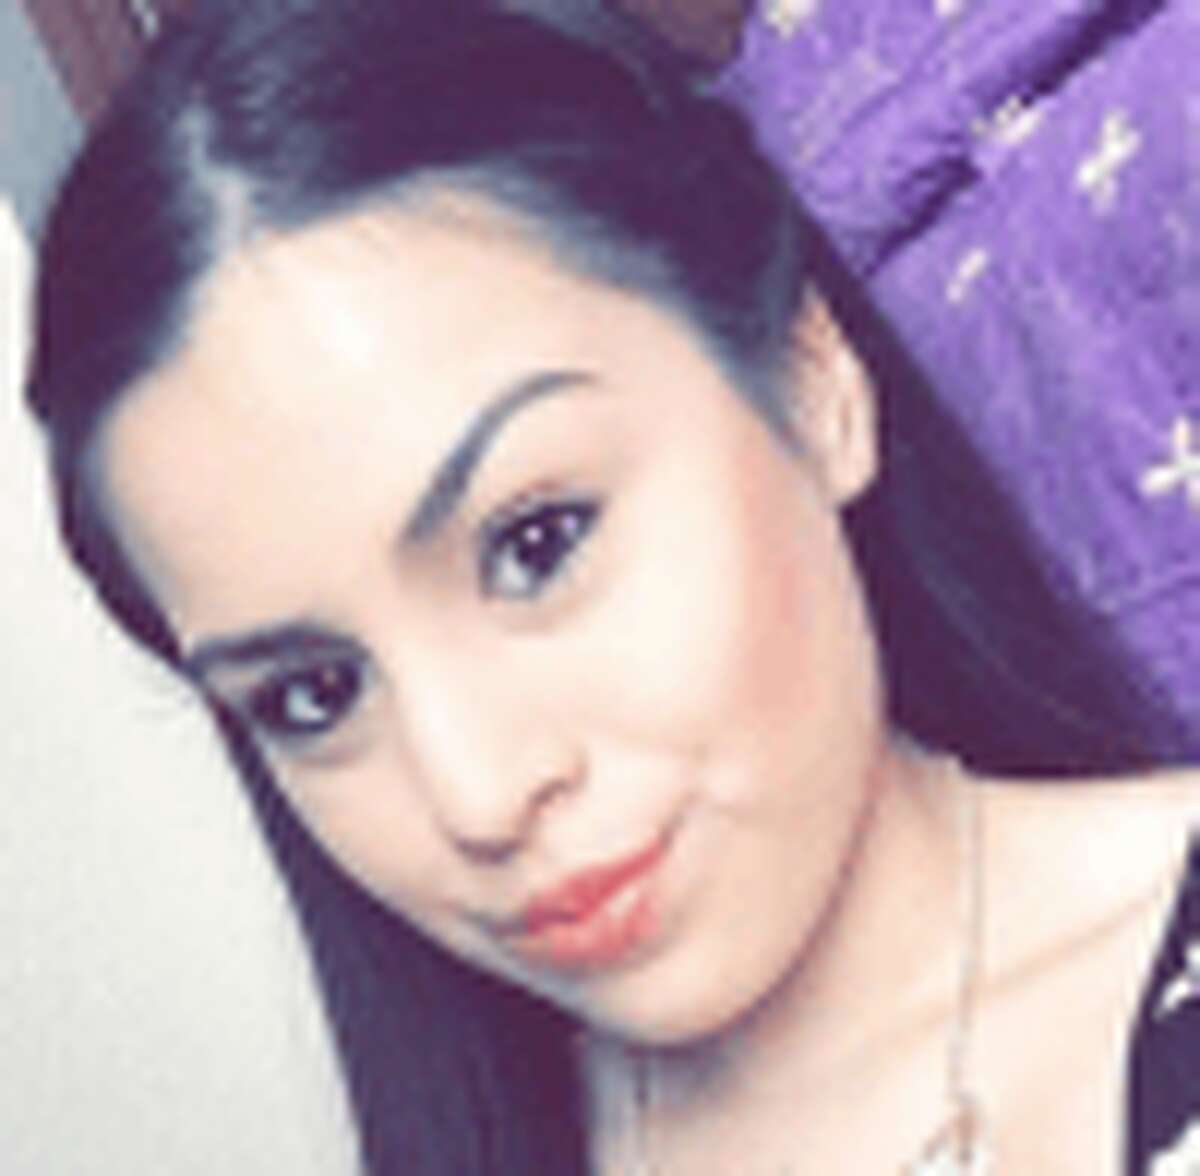 Karen Perez, 15, went missing May 27. 2016, after she left for school but never returned home. (Texas EquuSearch)